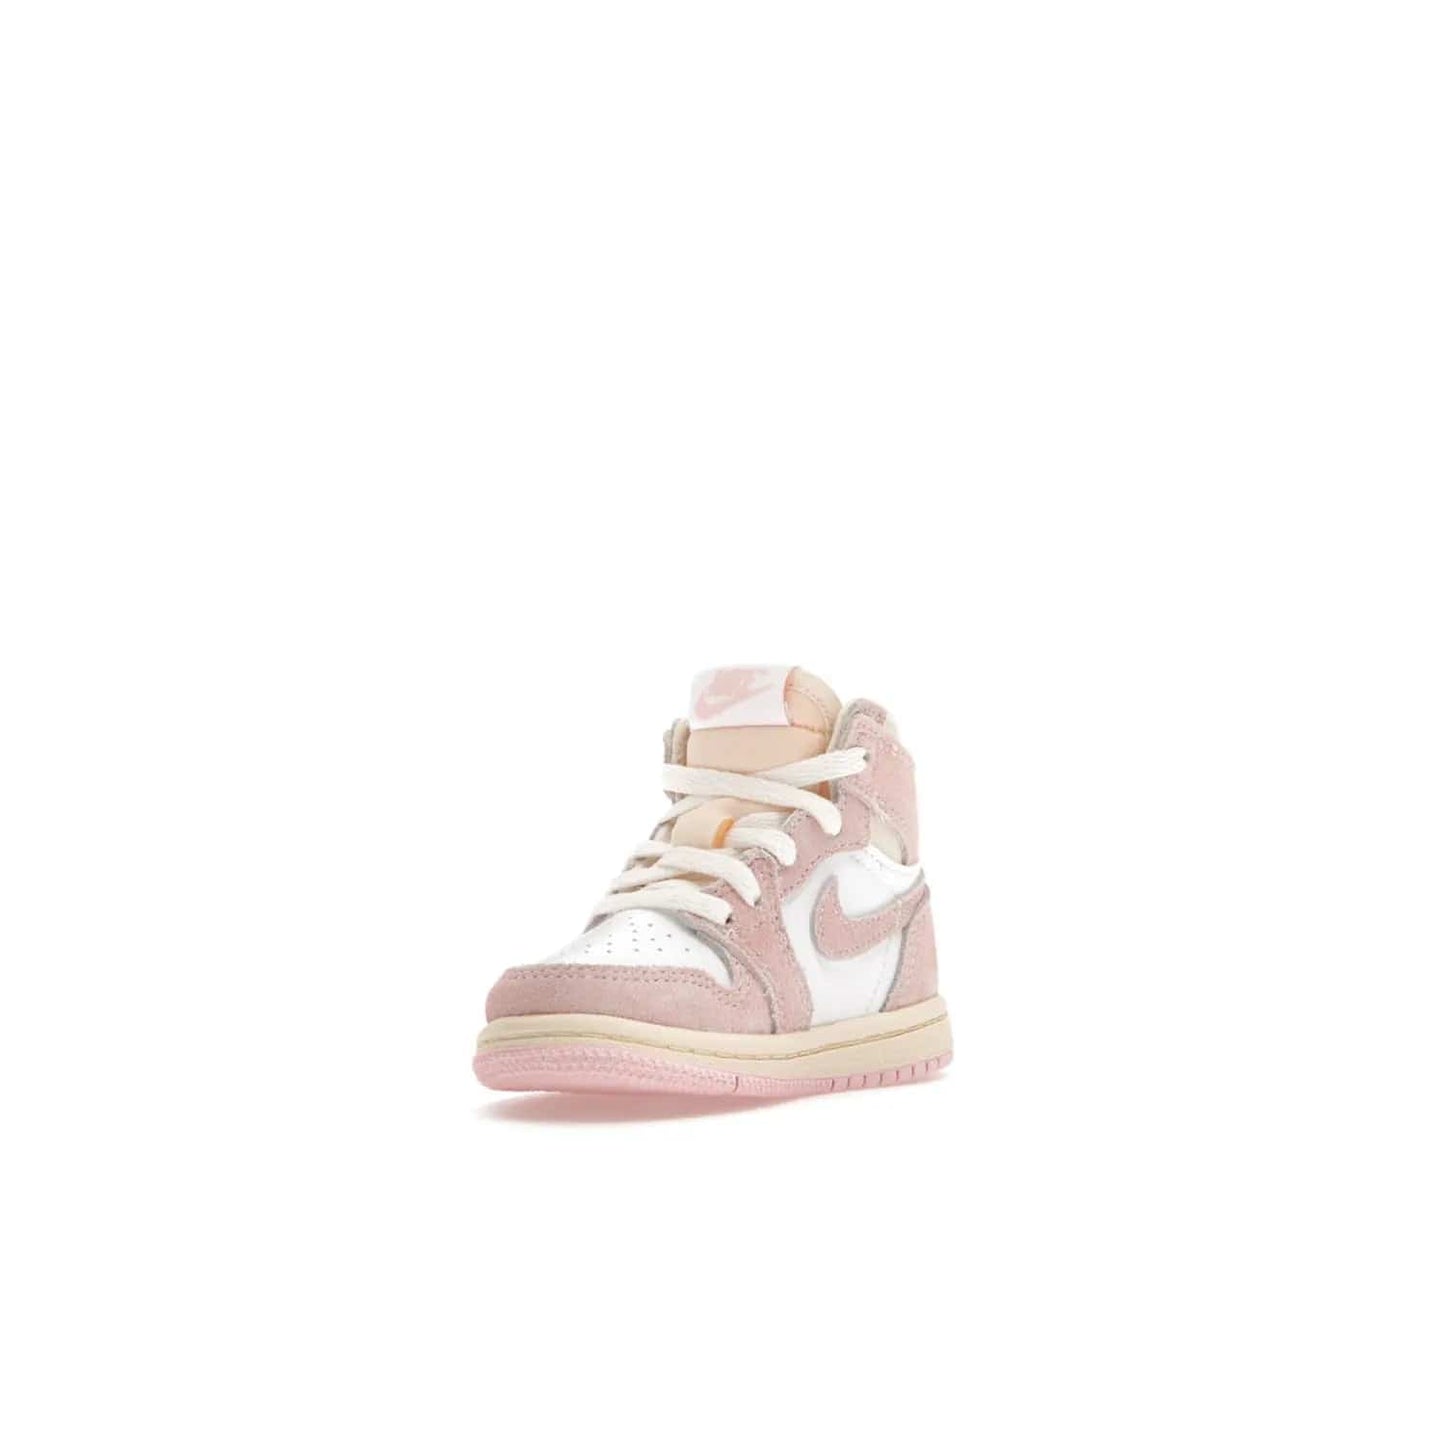 Jordan 1 Retro High OG Washed Pink (TD) - Image 14 - Only at www.BallersClubKickz.com - Retro style meets modern comfort: Introducing the Jordan 1 High OG Washed Pink (TD). Combining Atmosphere/White/Muslin/Sail colors with a high-rise silhouette, these shoes will be an instant classic when they release April 22, 2023.